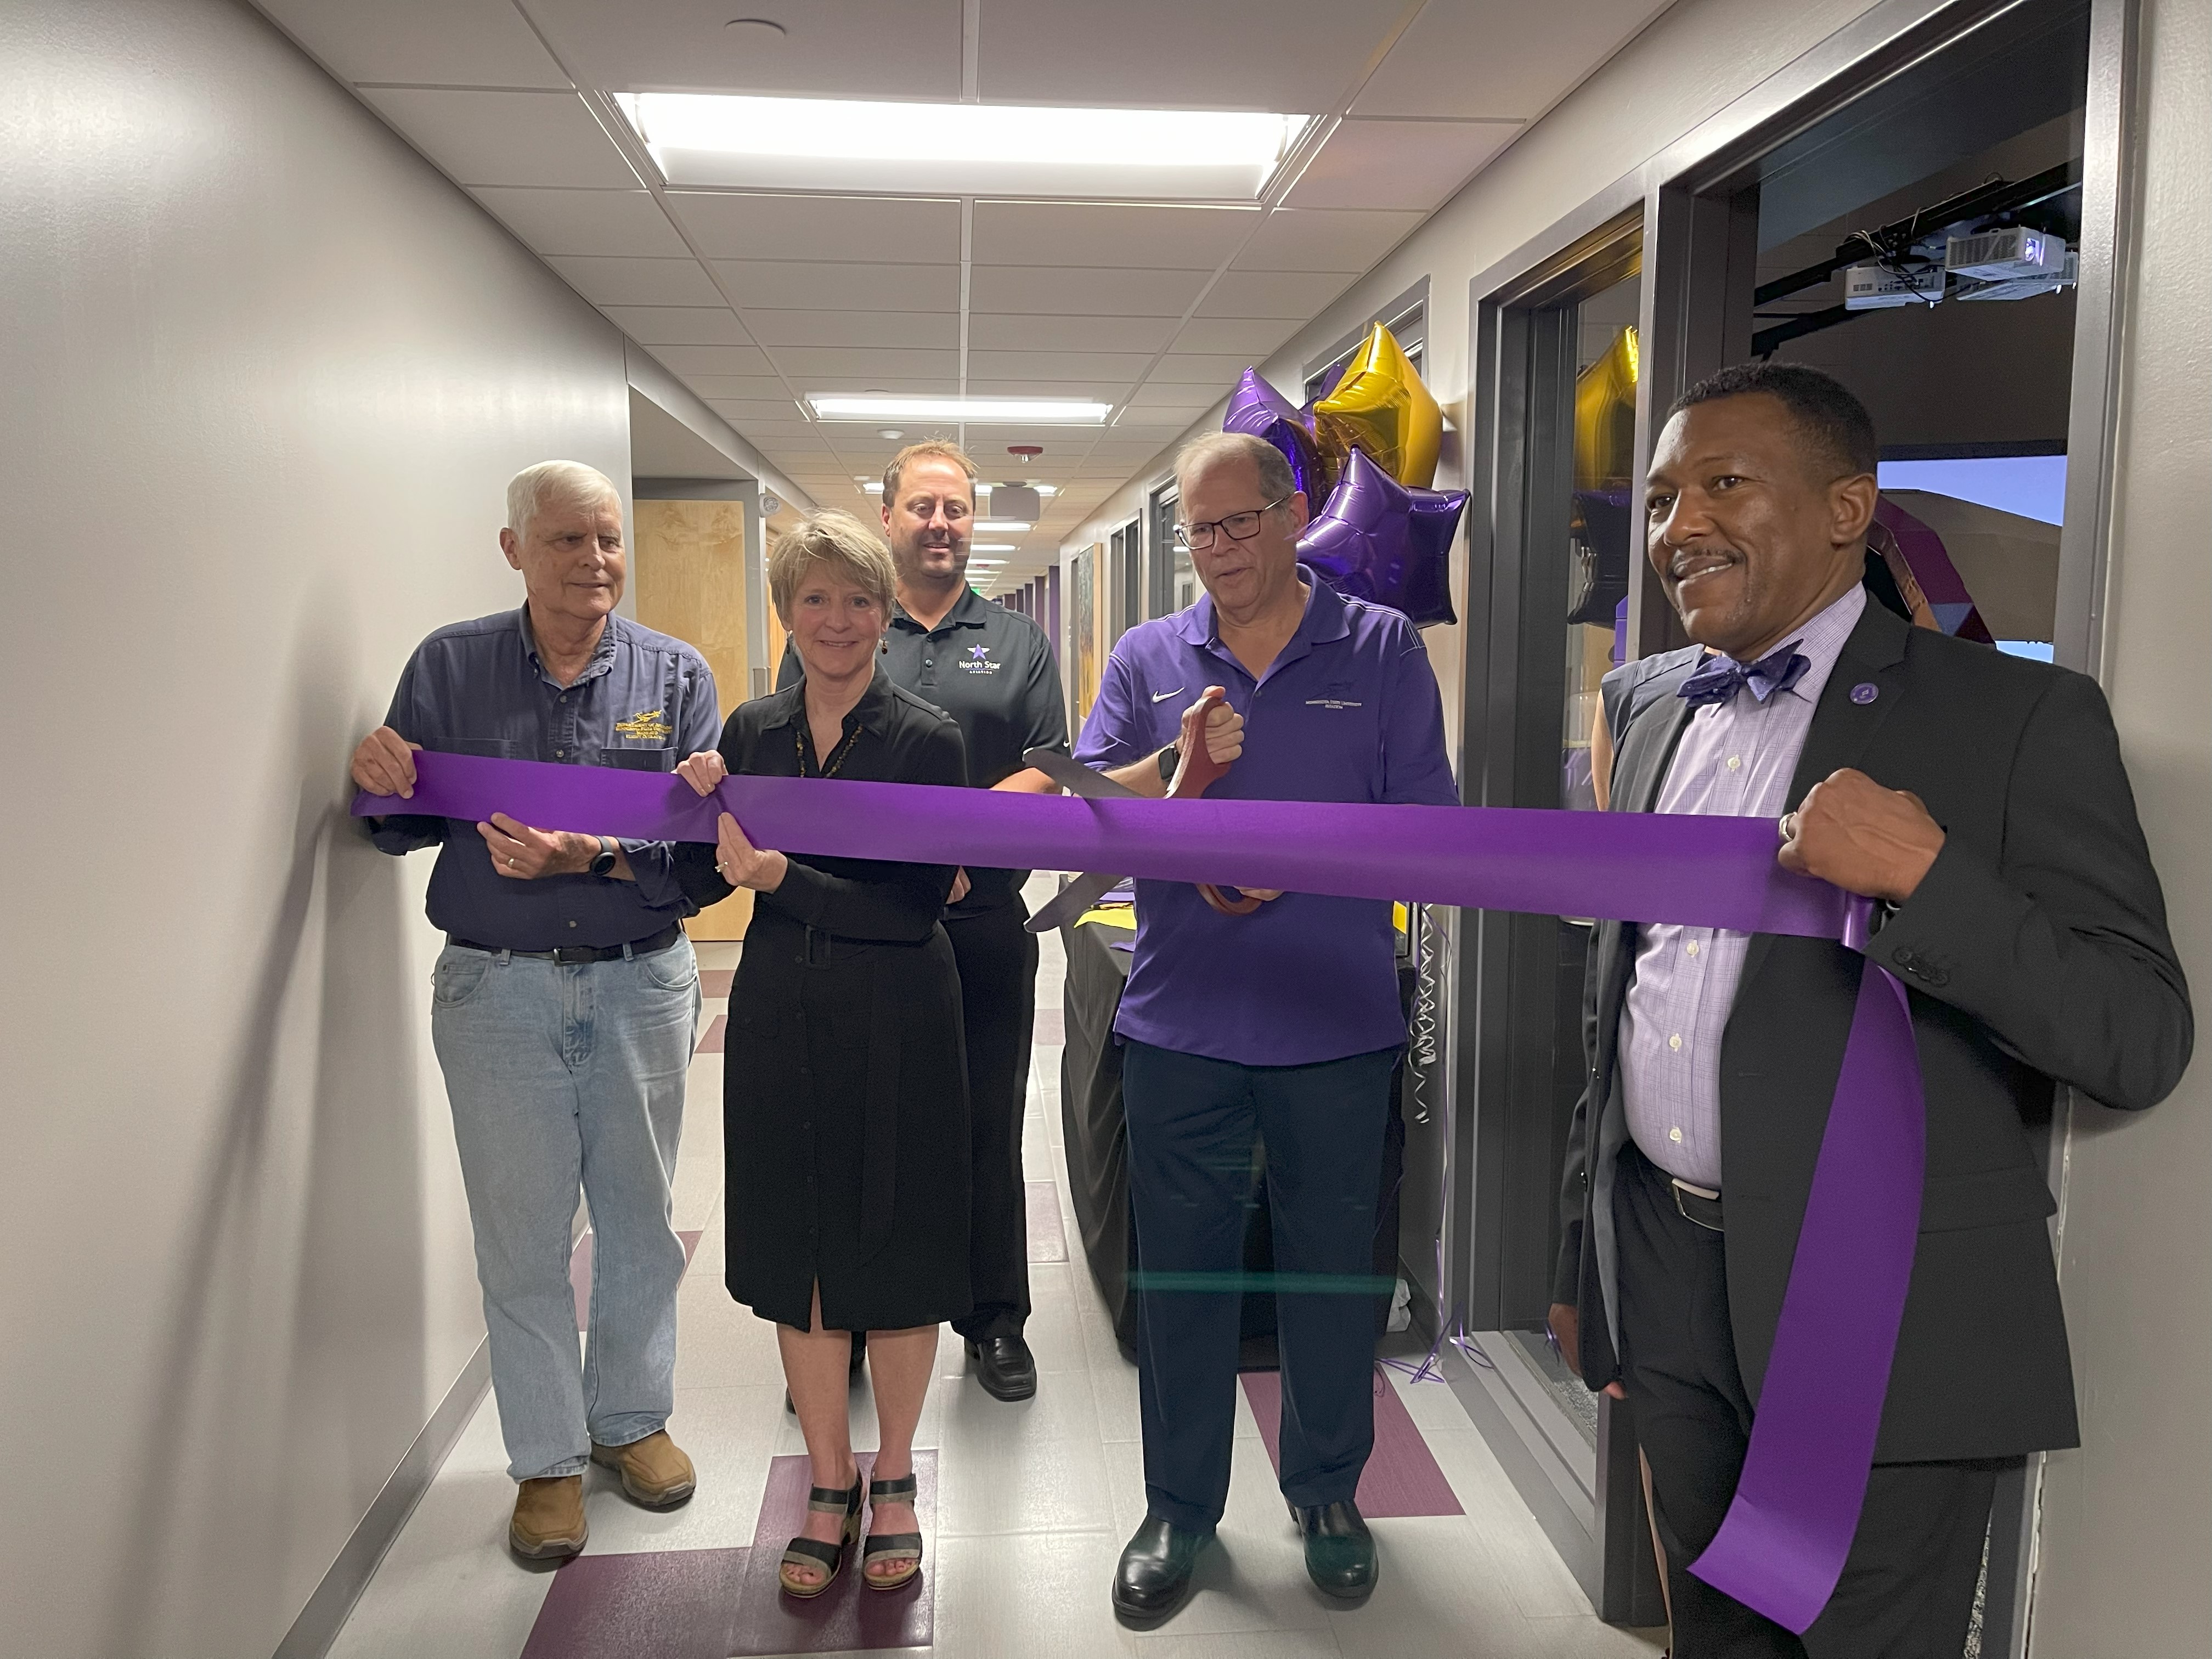 University members cutting the ceremonial ribbon for the Aviation SimLab